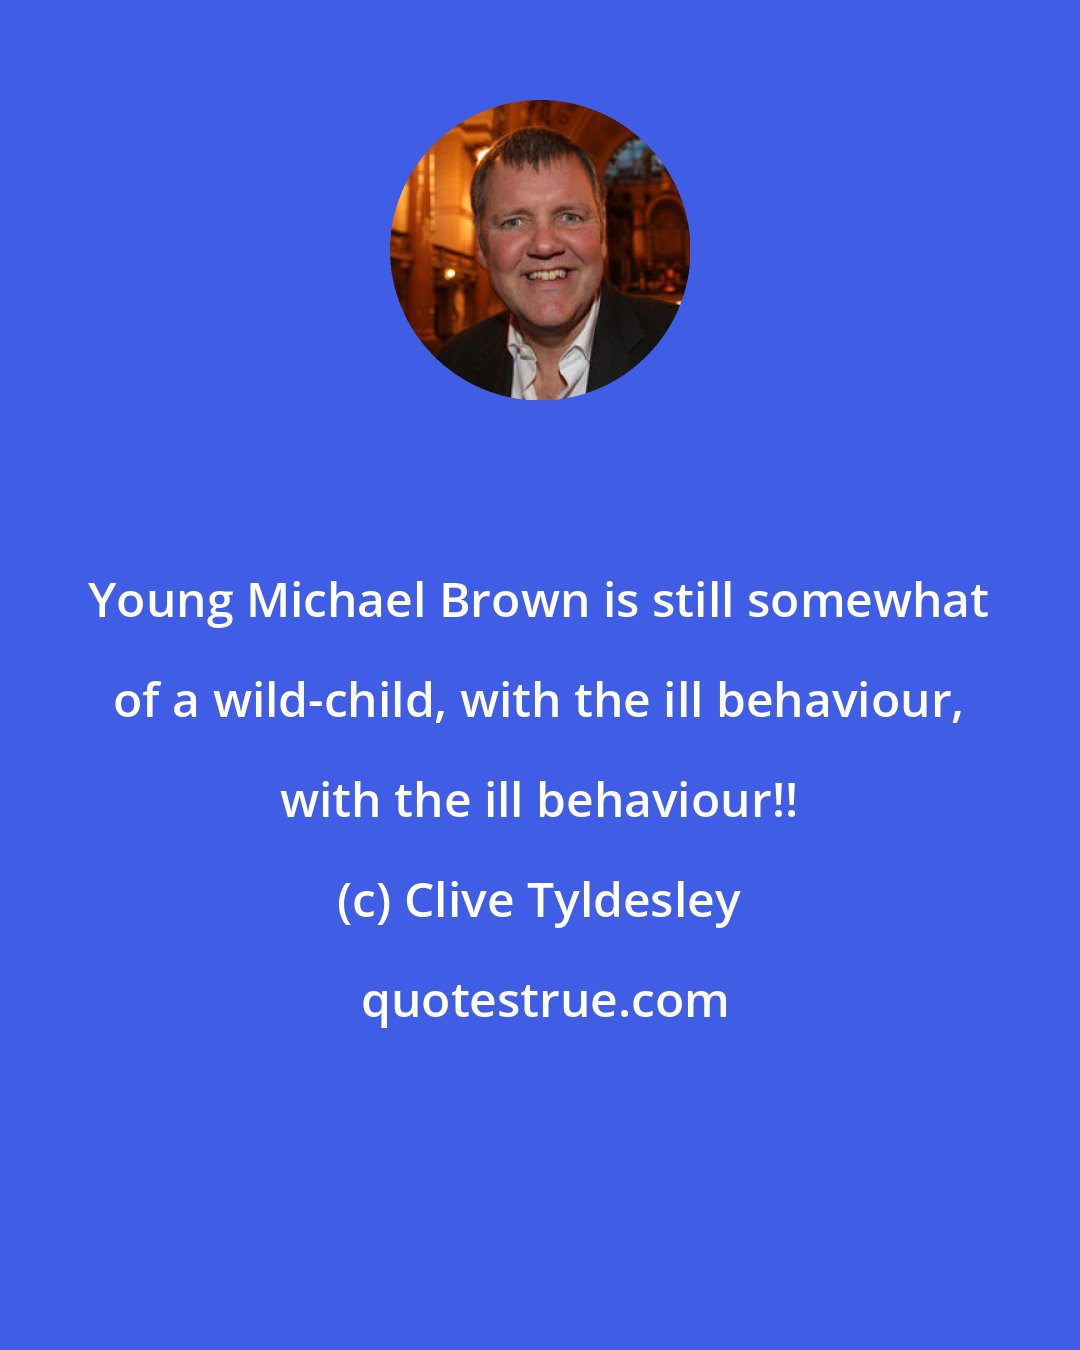 Clive Tyldesley: Young Michael Brown is still somewhat of a wild-child, with the ill behaviour, with the ill behaviour!!